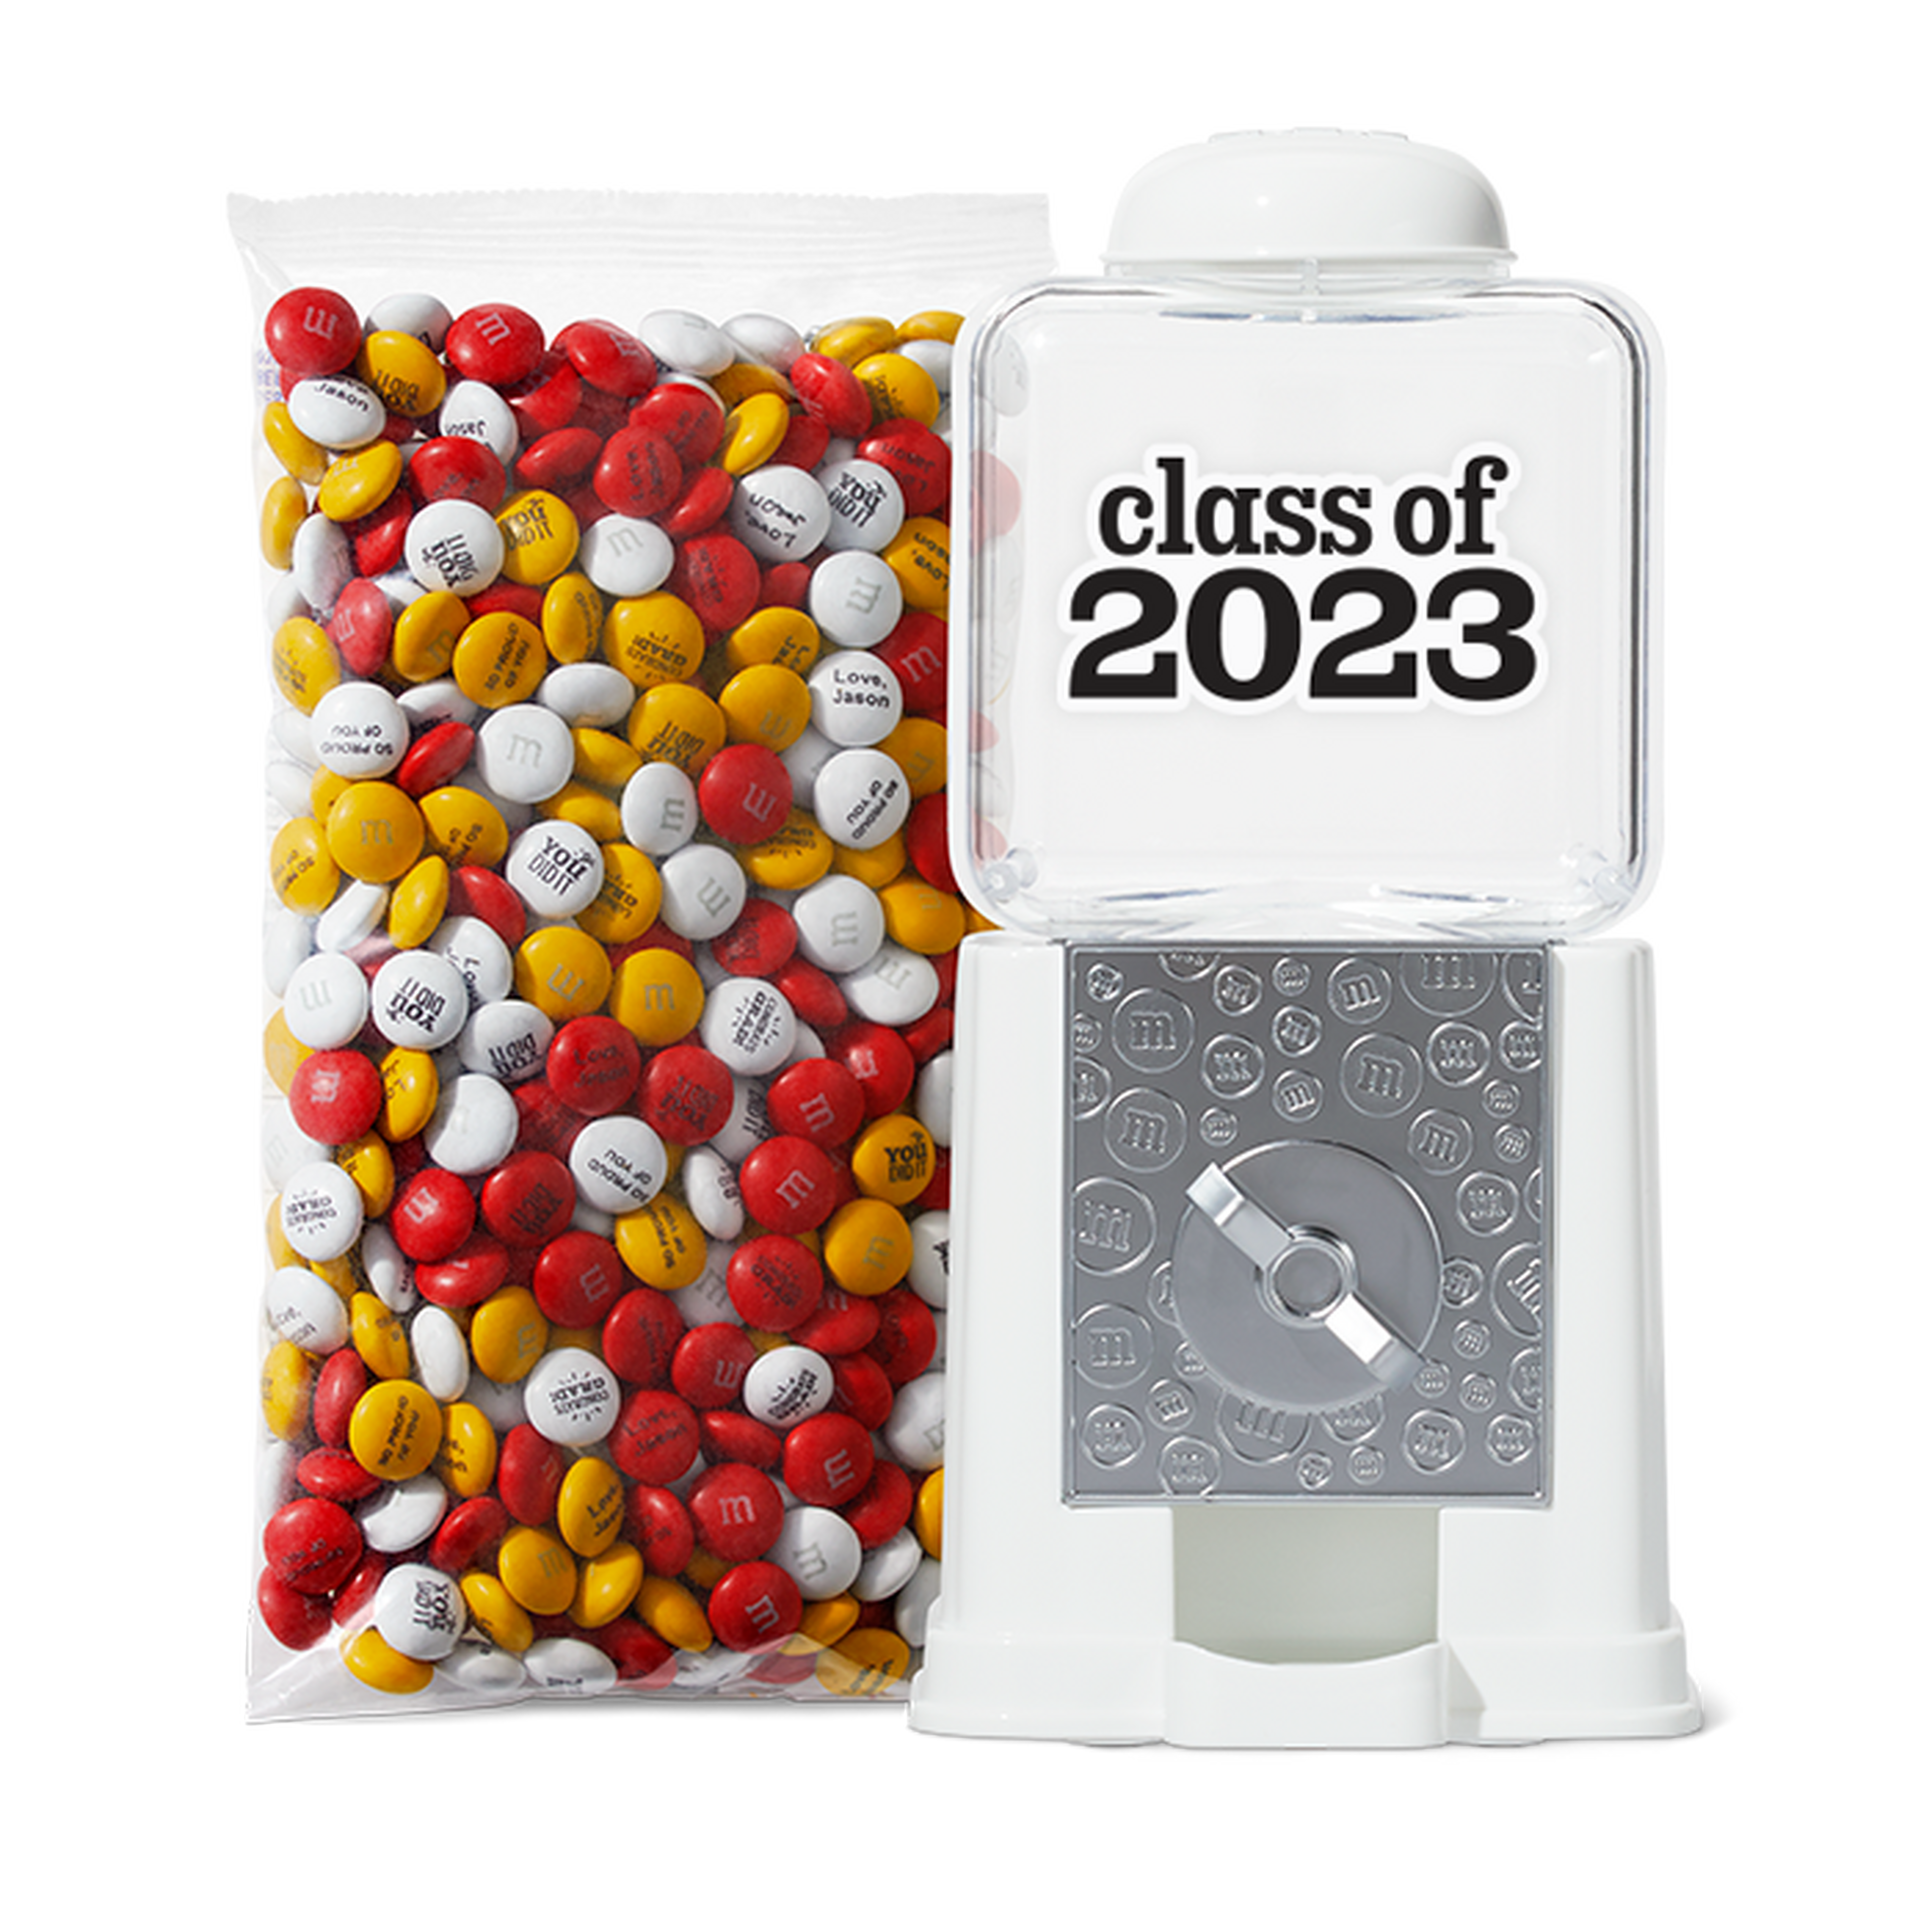 M&M'S Class of 2023 Milk Chocolate Candies, 5 Pounds of White Bulk Candy  With Printed Graduation Themed Images, Resealable Pack for Parties, Grad